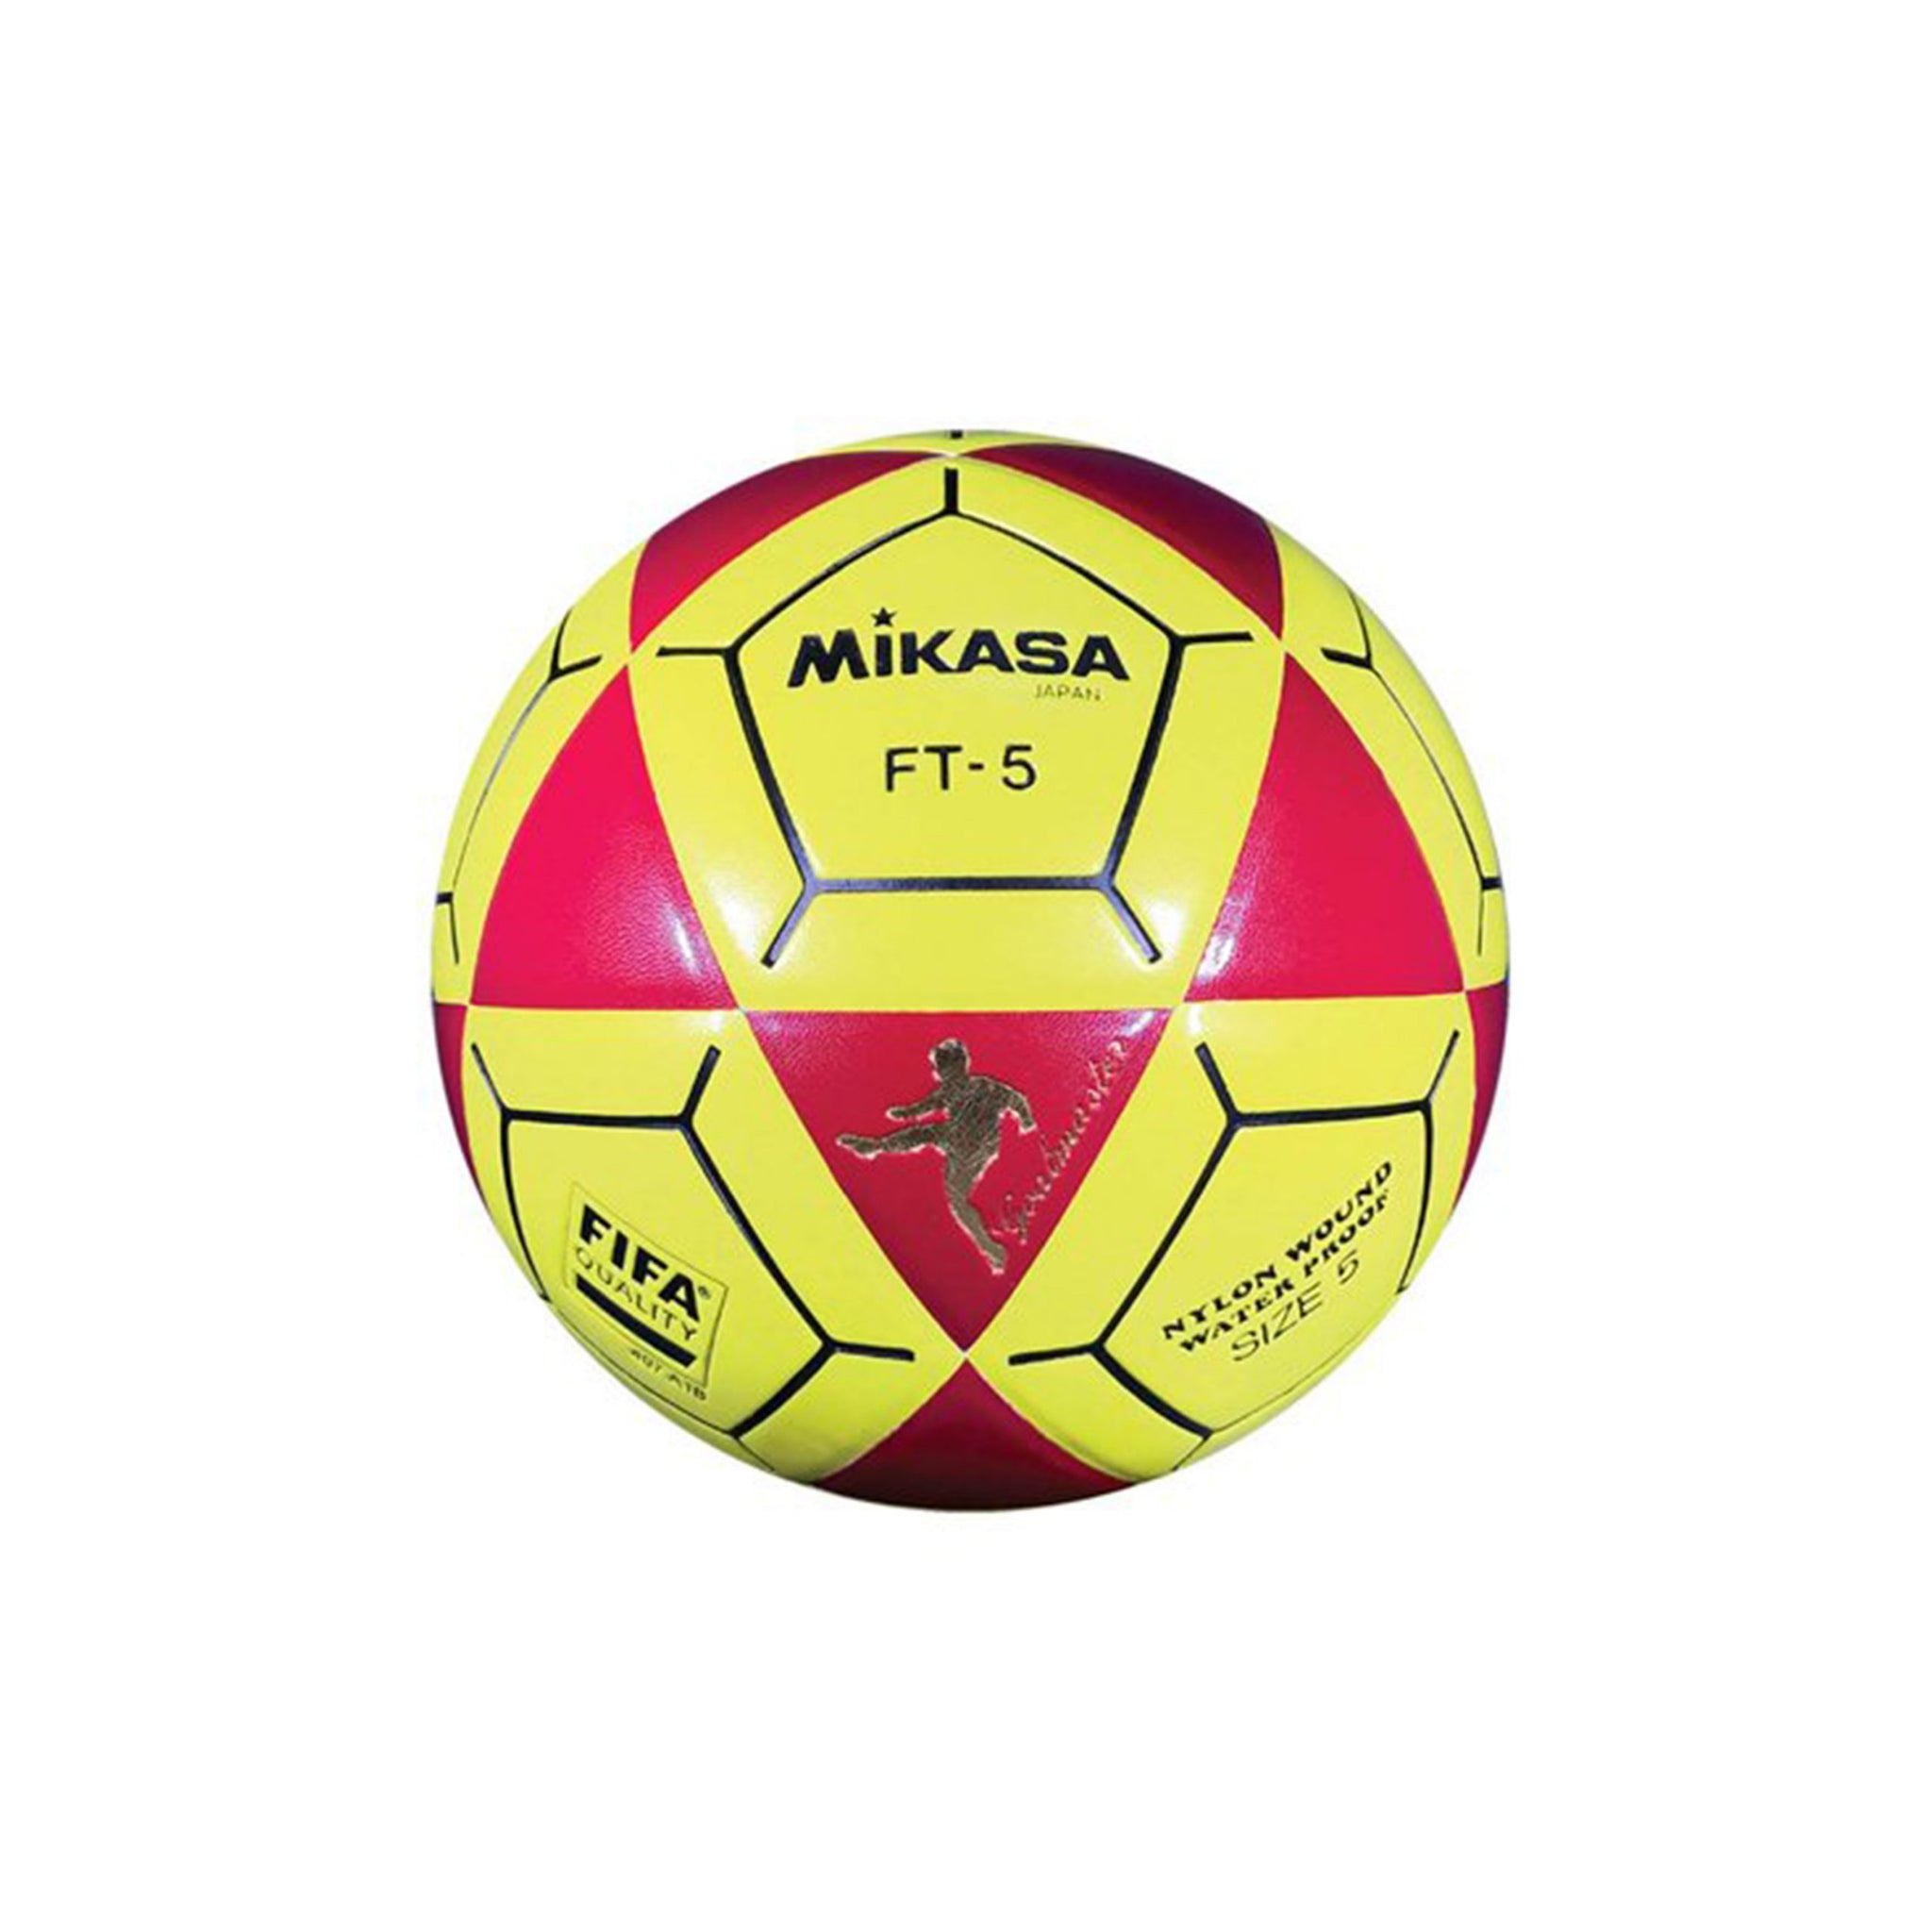 MIKASA FT - 5A Ball (Red & Yellow)